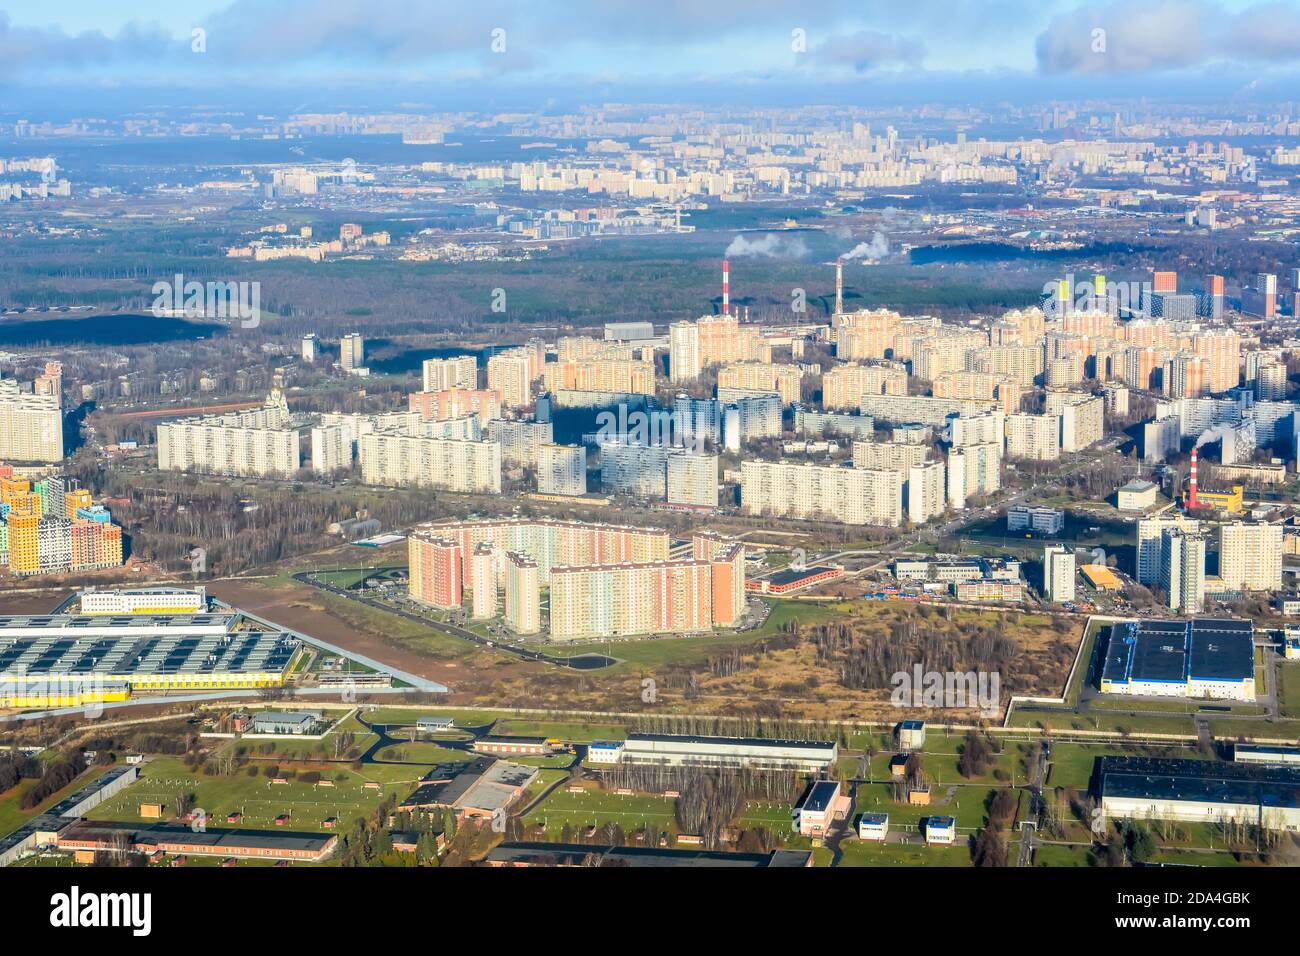 View over residential buildings in Solntsevo district of Moscow, Russia. Stock Photo